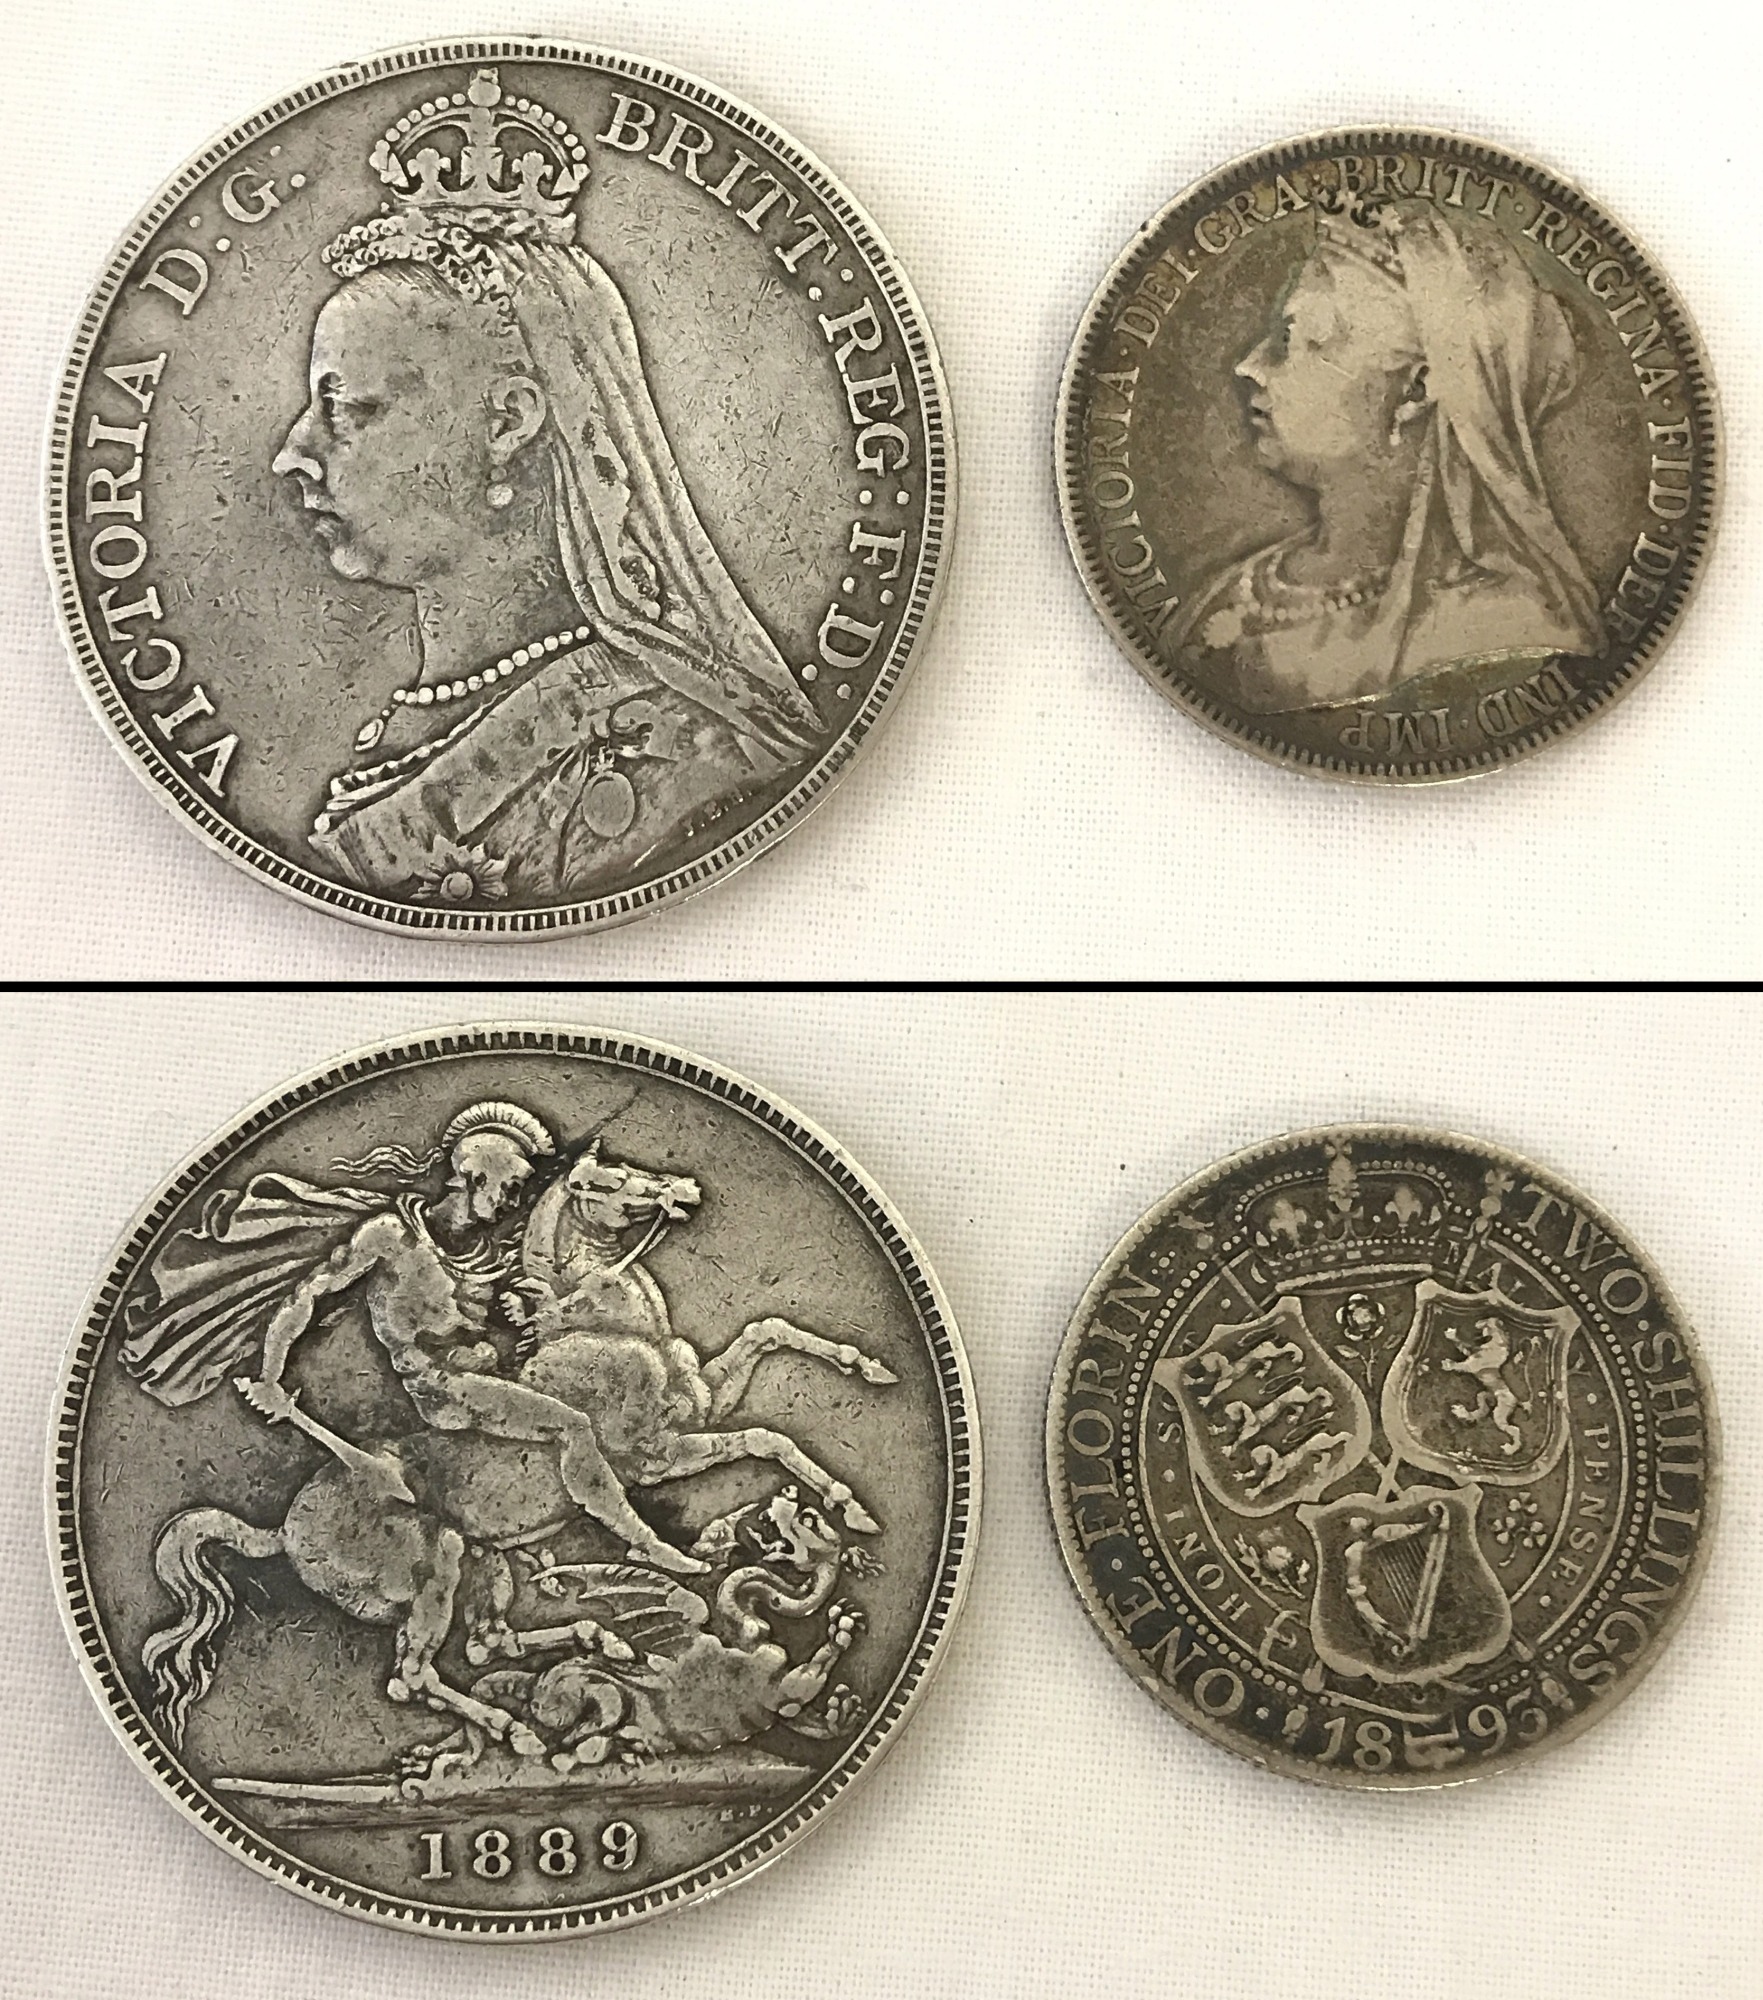 An 1889 Victoria Jubilee silver crown together with a Victorian veiled head 1895 silver Florin.